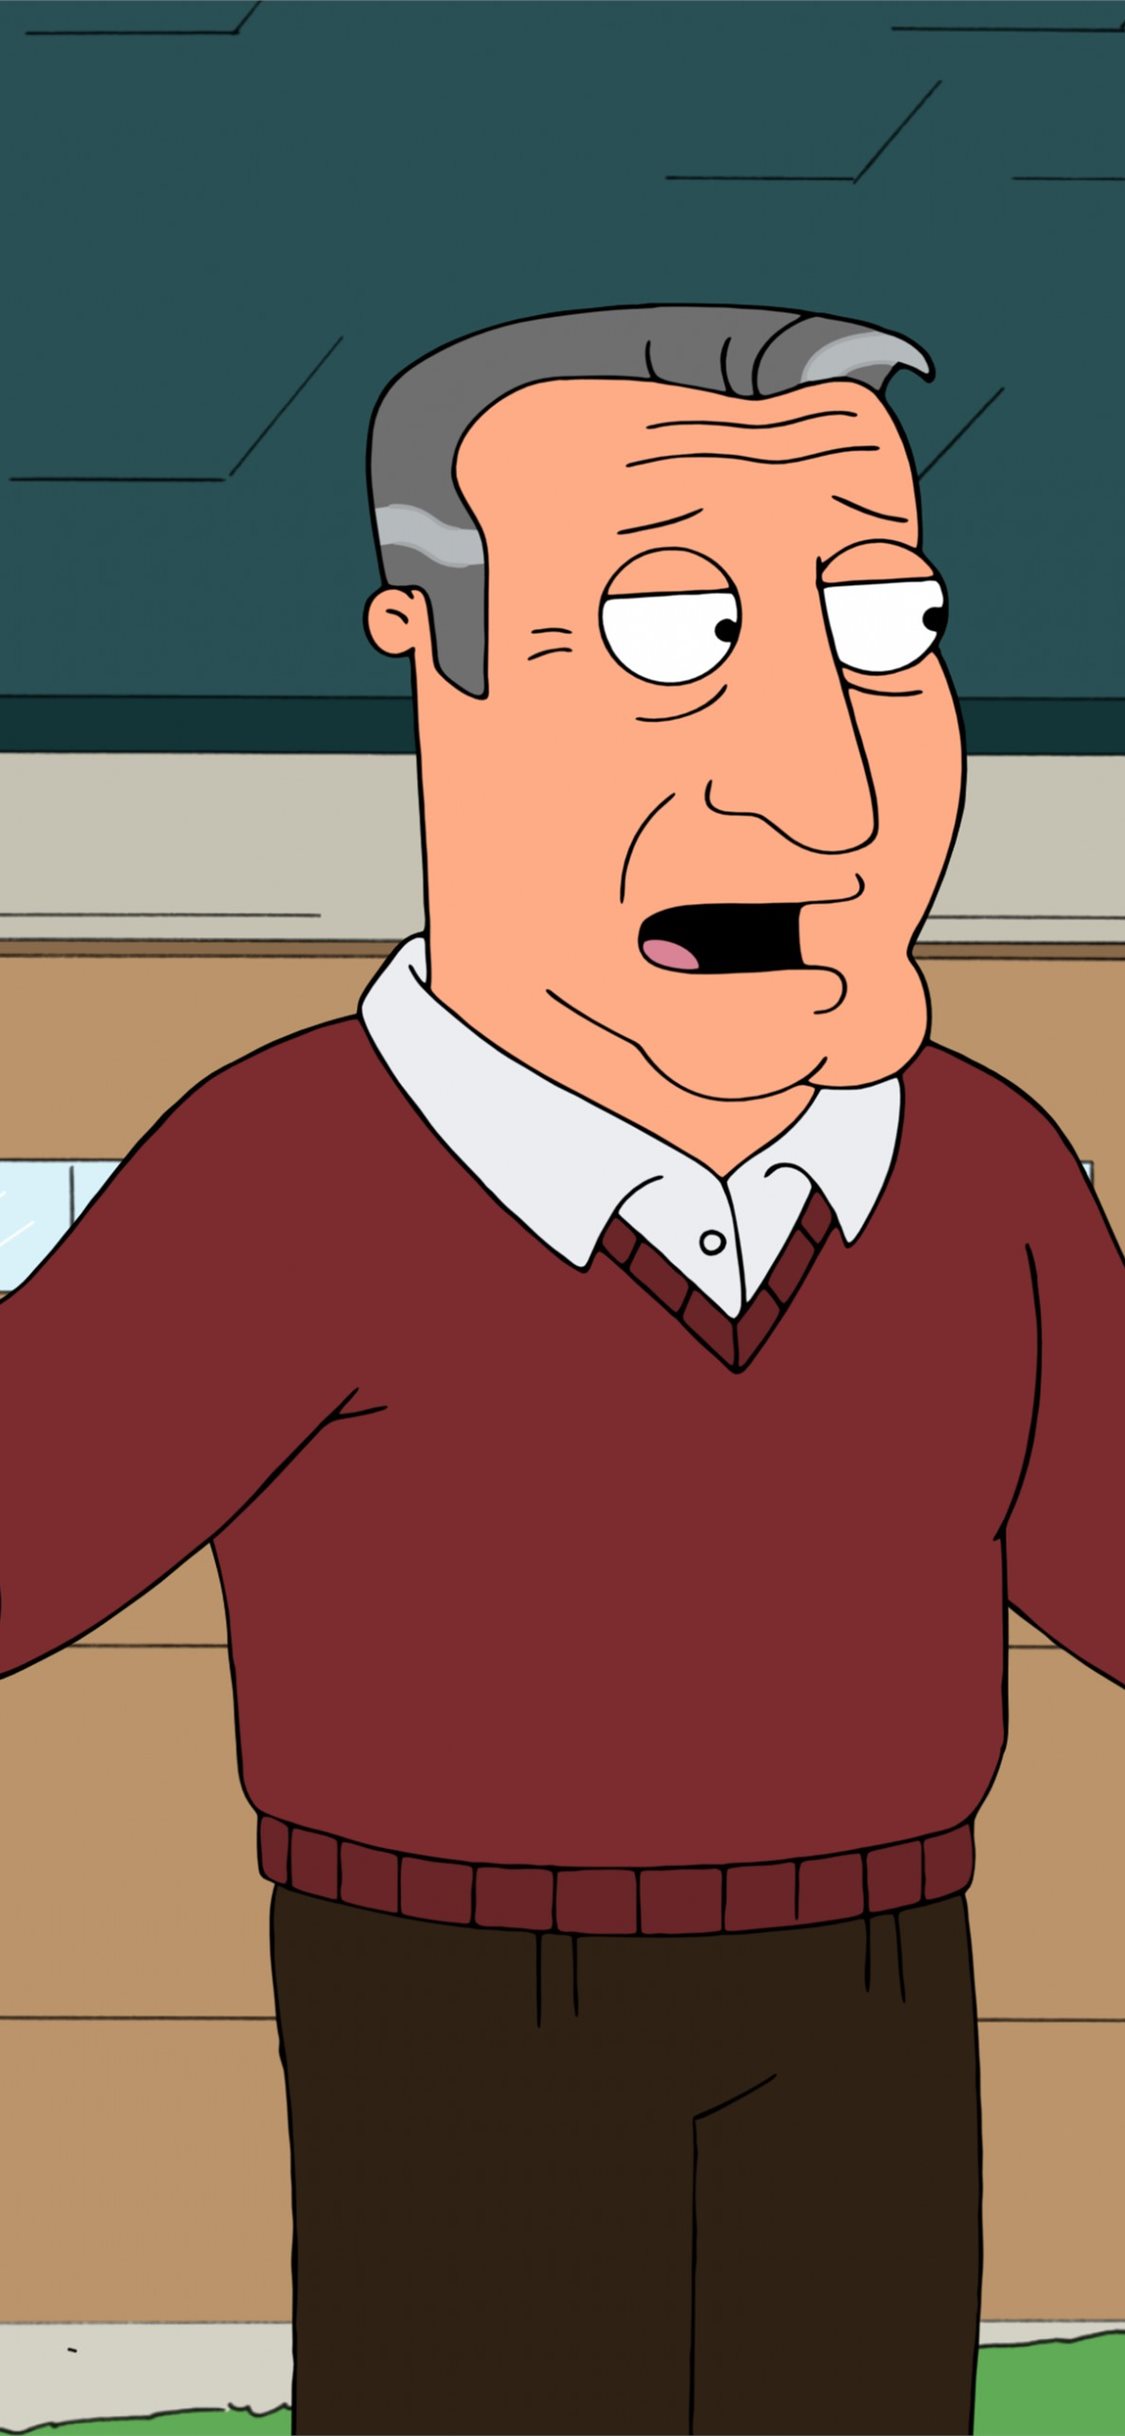 Family Guy Iphone Wallpapers